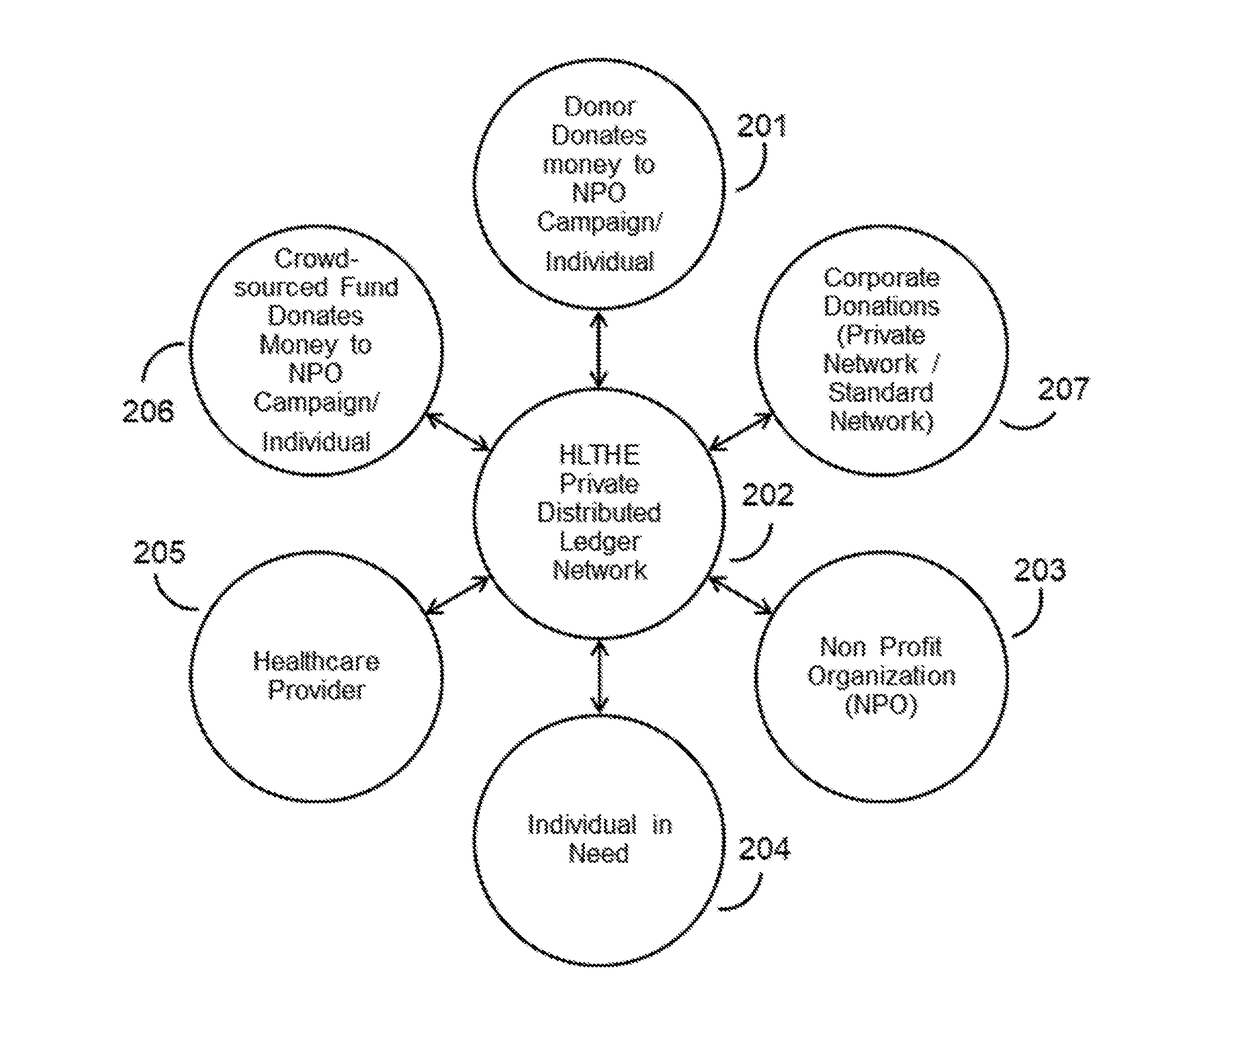 System and Method for Healthcare Donations using a Private Distributed Ledger